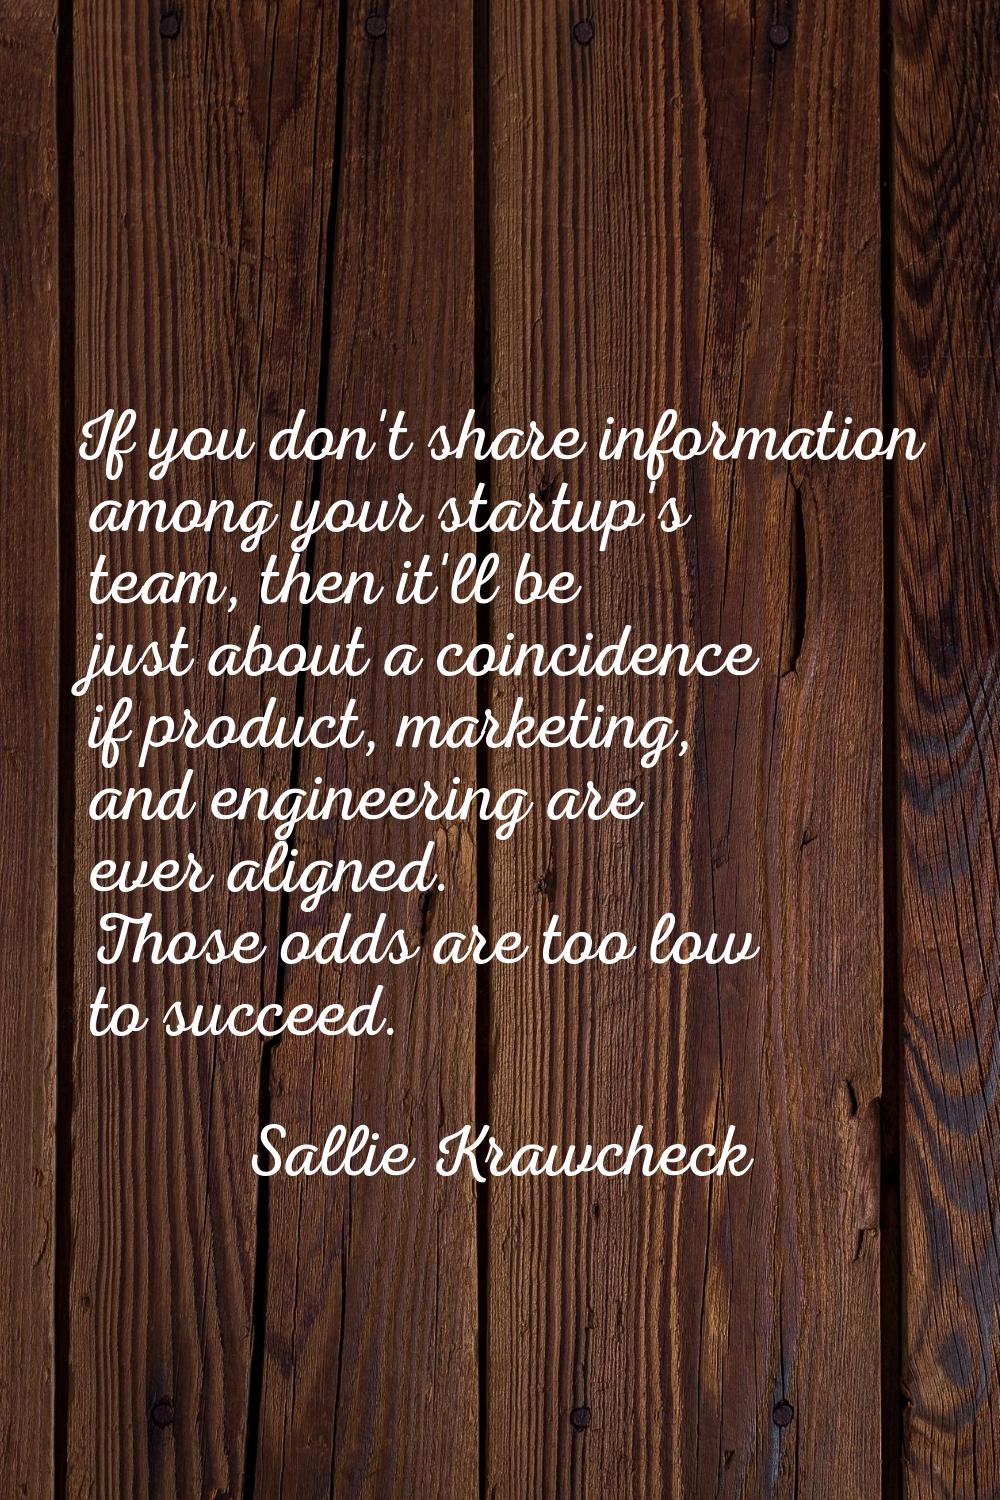 If you don't share information among your startup's team, then it'll be just about a coincidence if